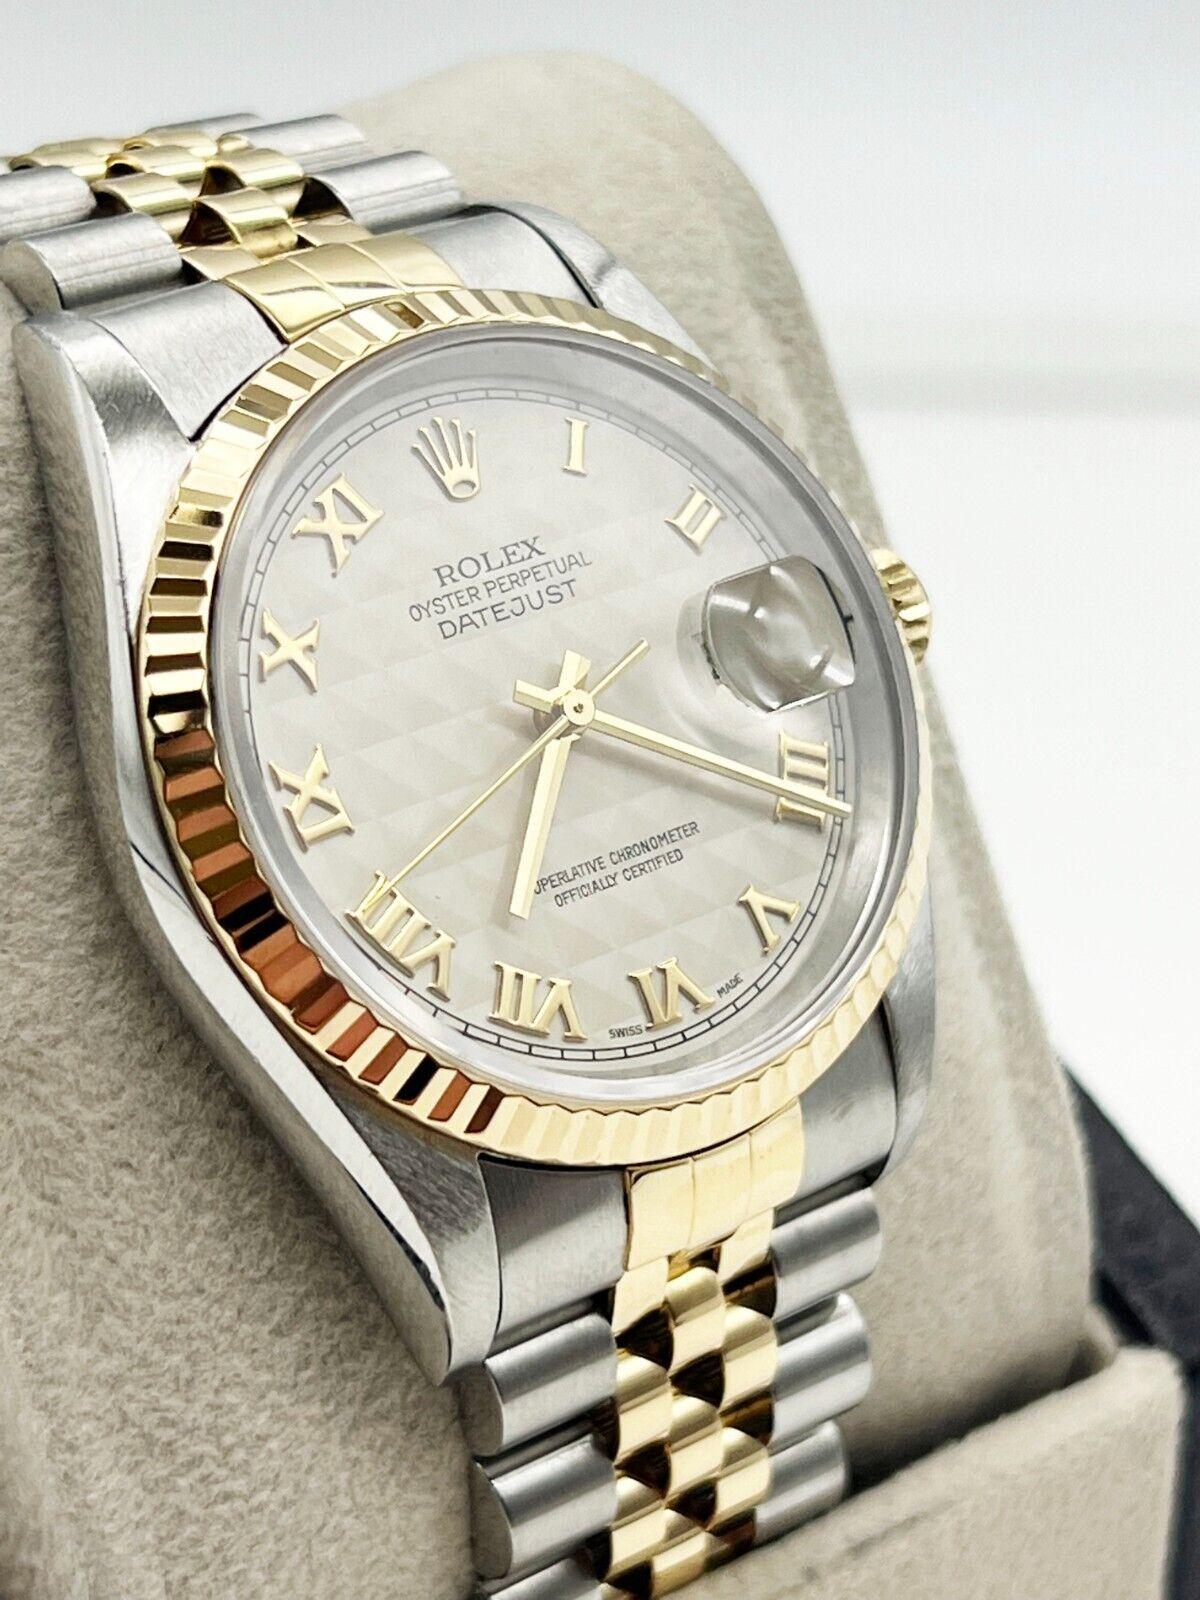 Style Number: 16233

Serial: W708***

Year: 1995

Model: Datejust 

Case Material: Stainless Steel 

Band: 18K Yellow Gold & Stainless Steel

Bezel: 18K Yellow Gold 

Dial: White Pyramid Dial 

 

Face: Sapphire Crystal 

Case Size: 36mm

Includes: